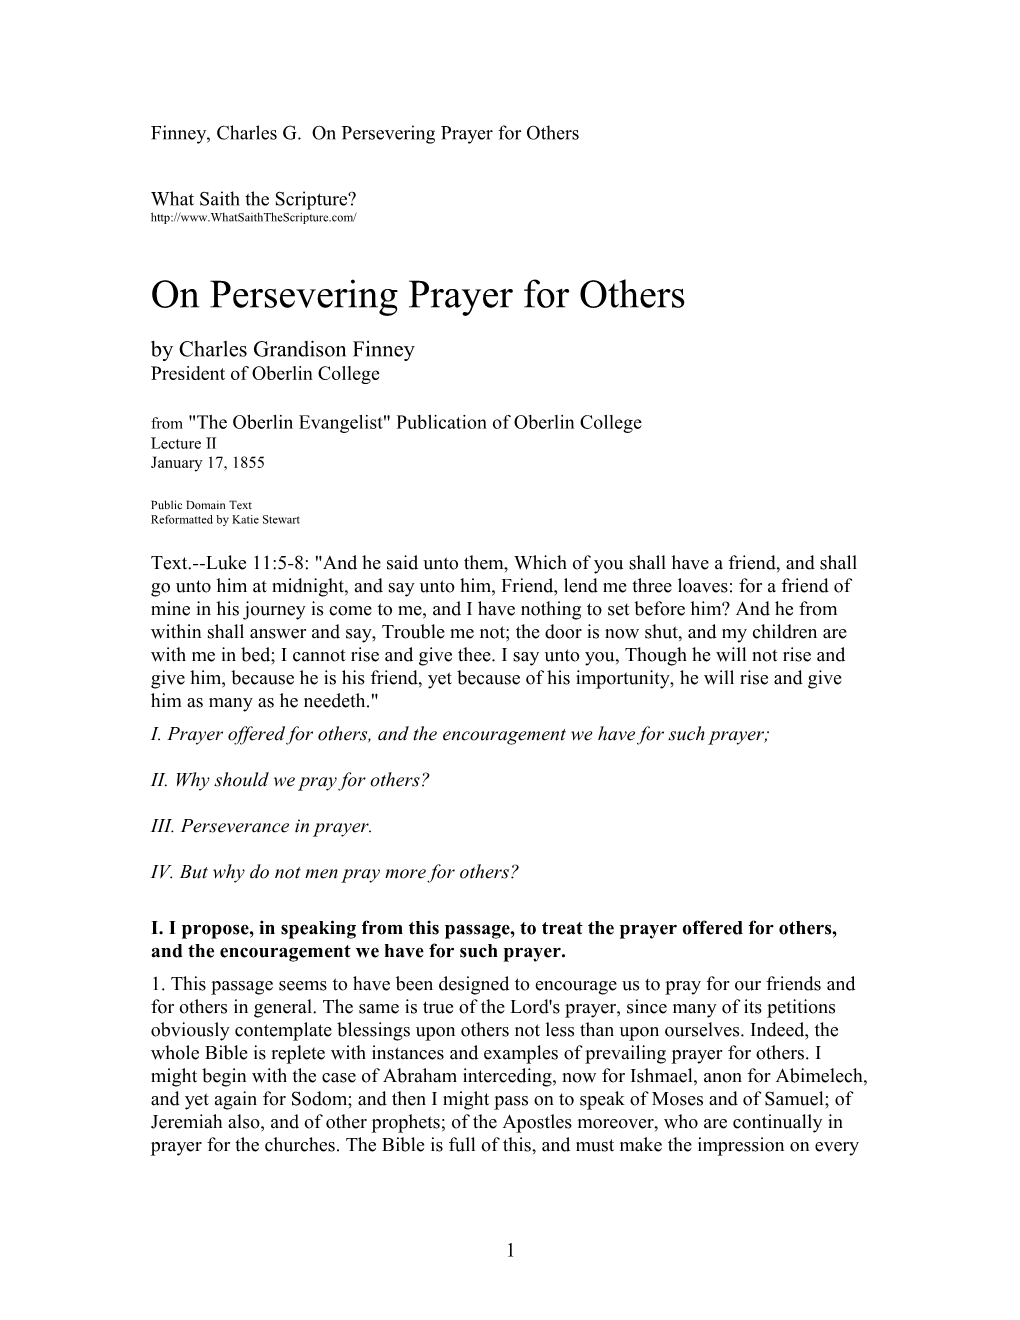 Finney, Charles G. on Persevering Prayer for Others